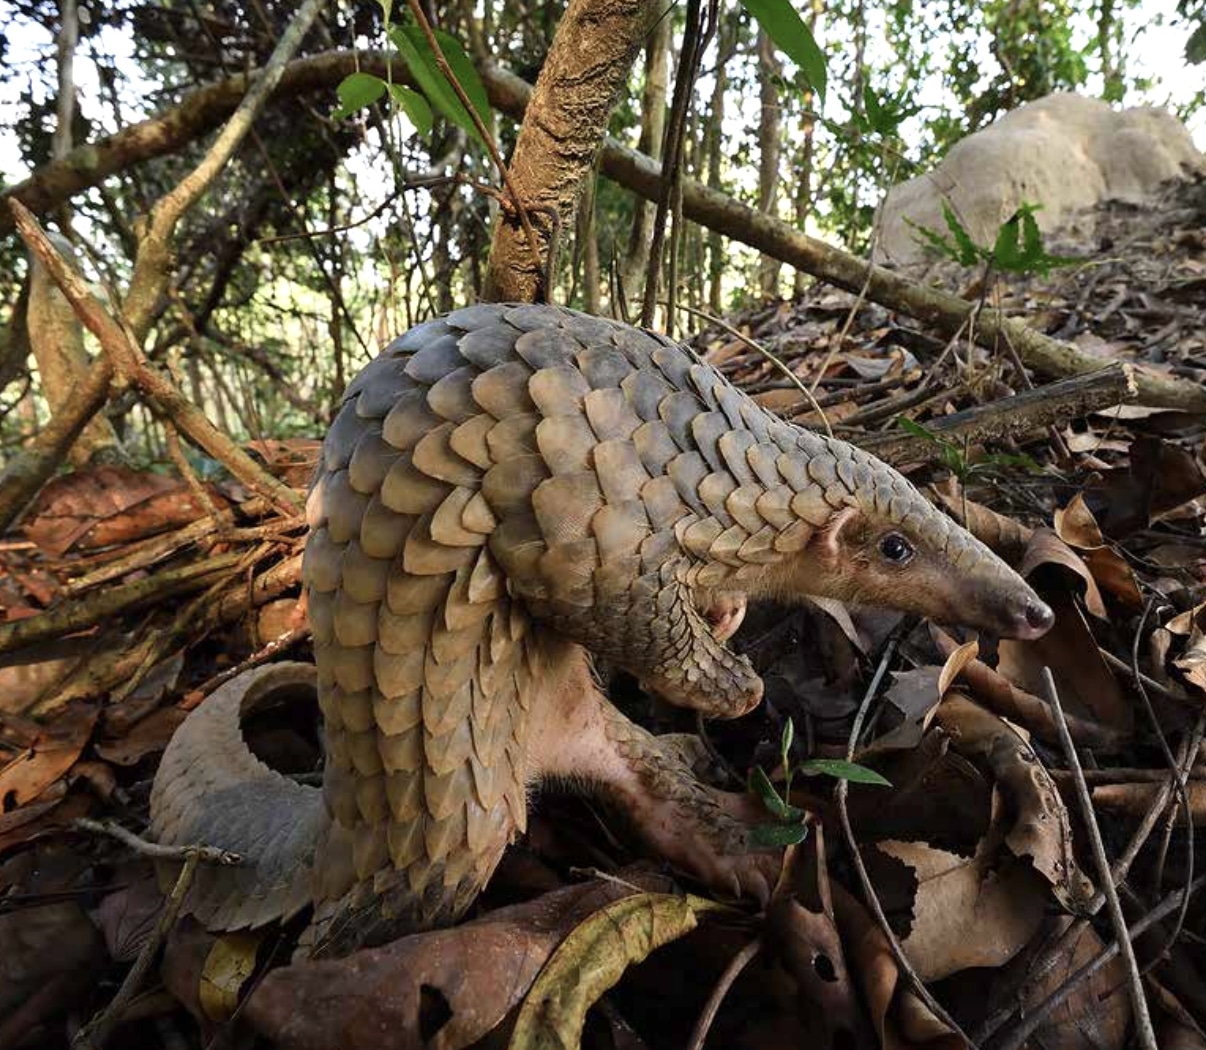 More Than 700 Wildlife Species Discovered in Cambodian Mangrove Forest